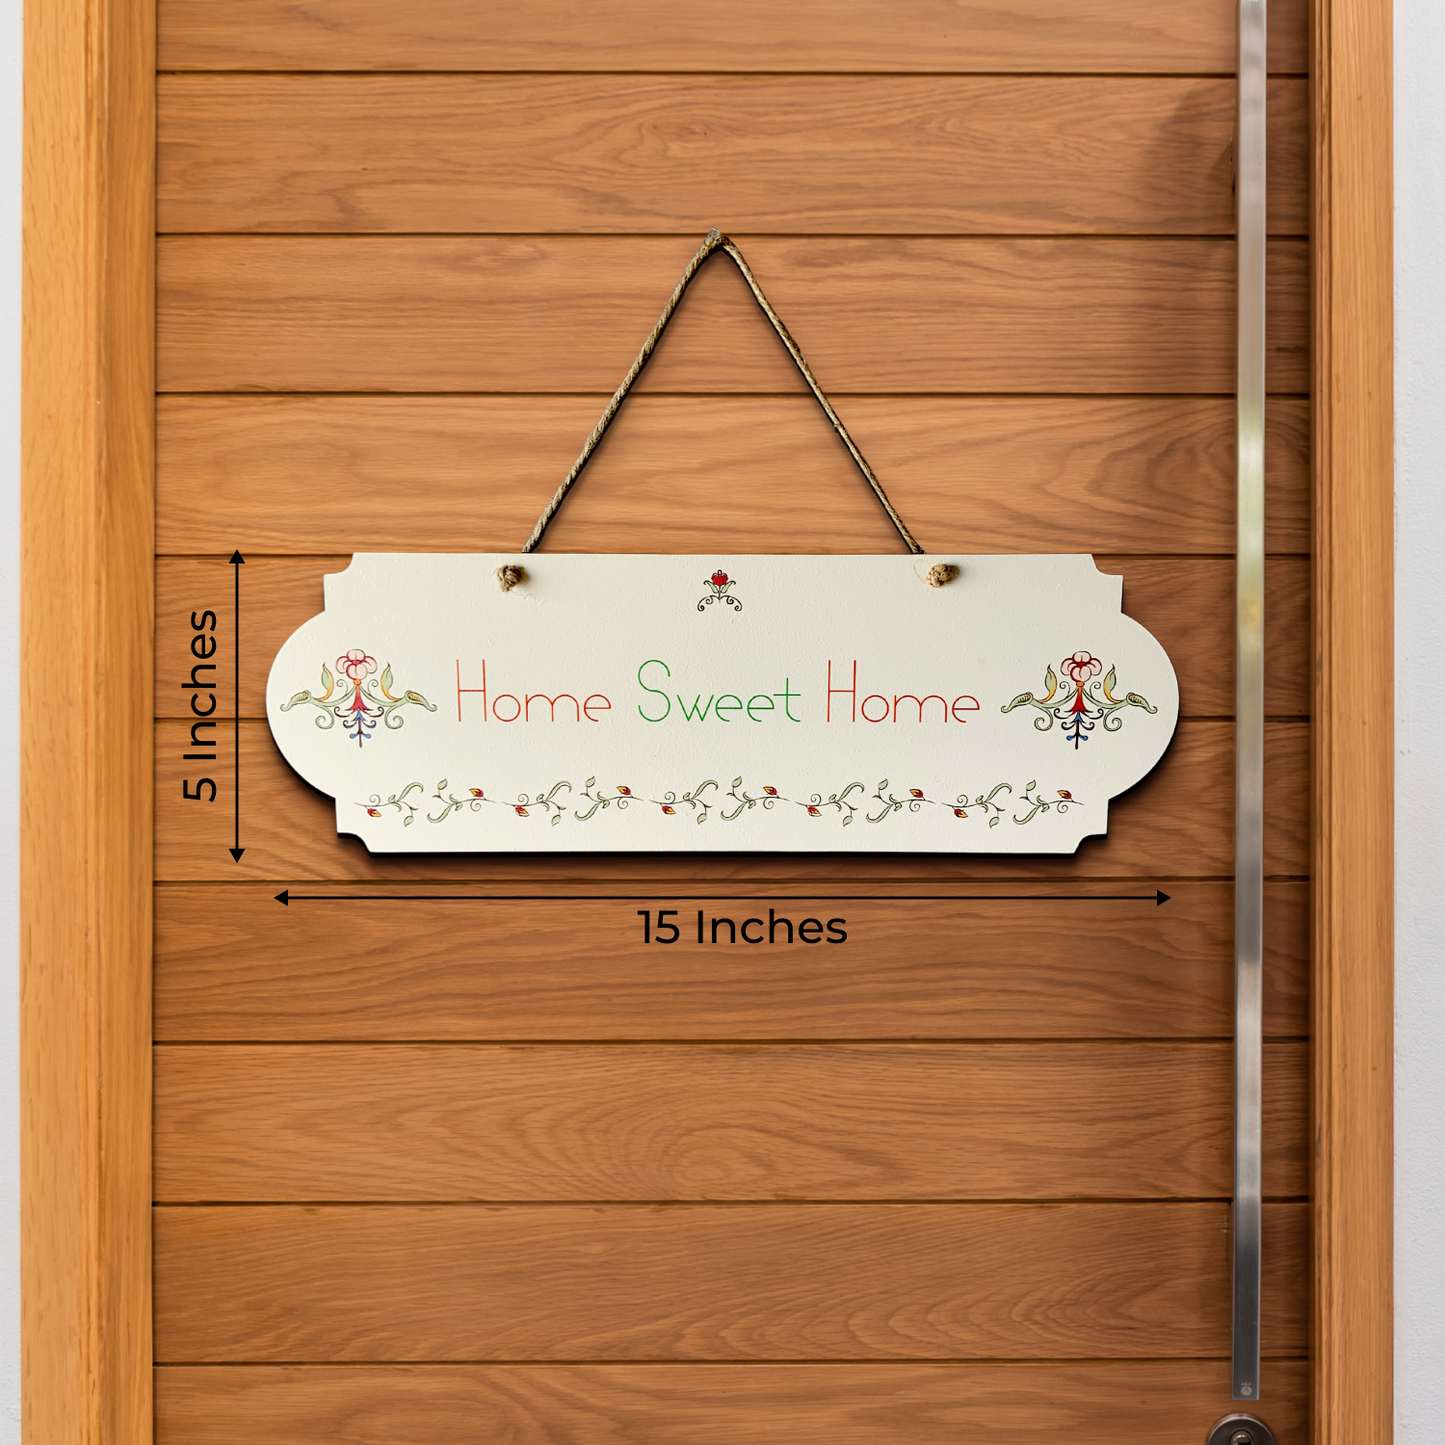 Home Sweet Home Wood Print Colorful Wall or Door Hanging